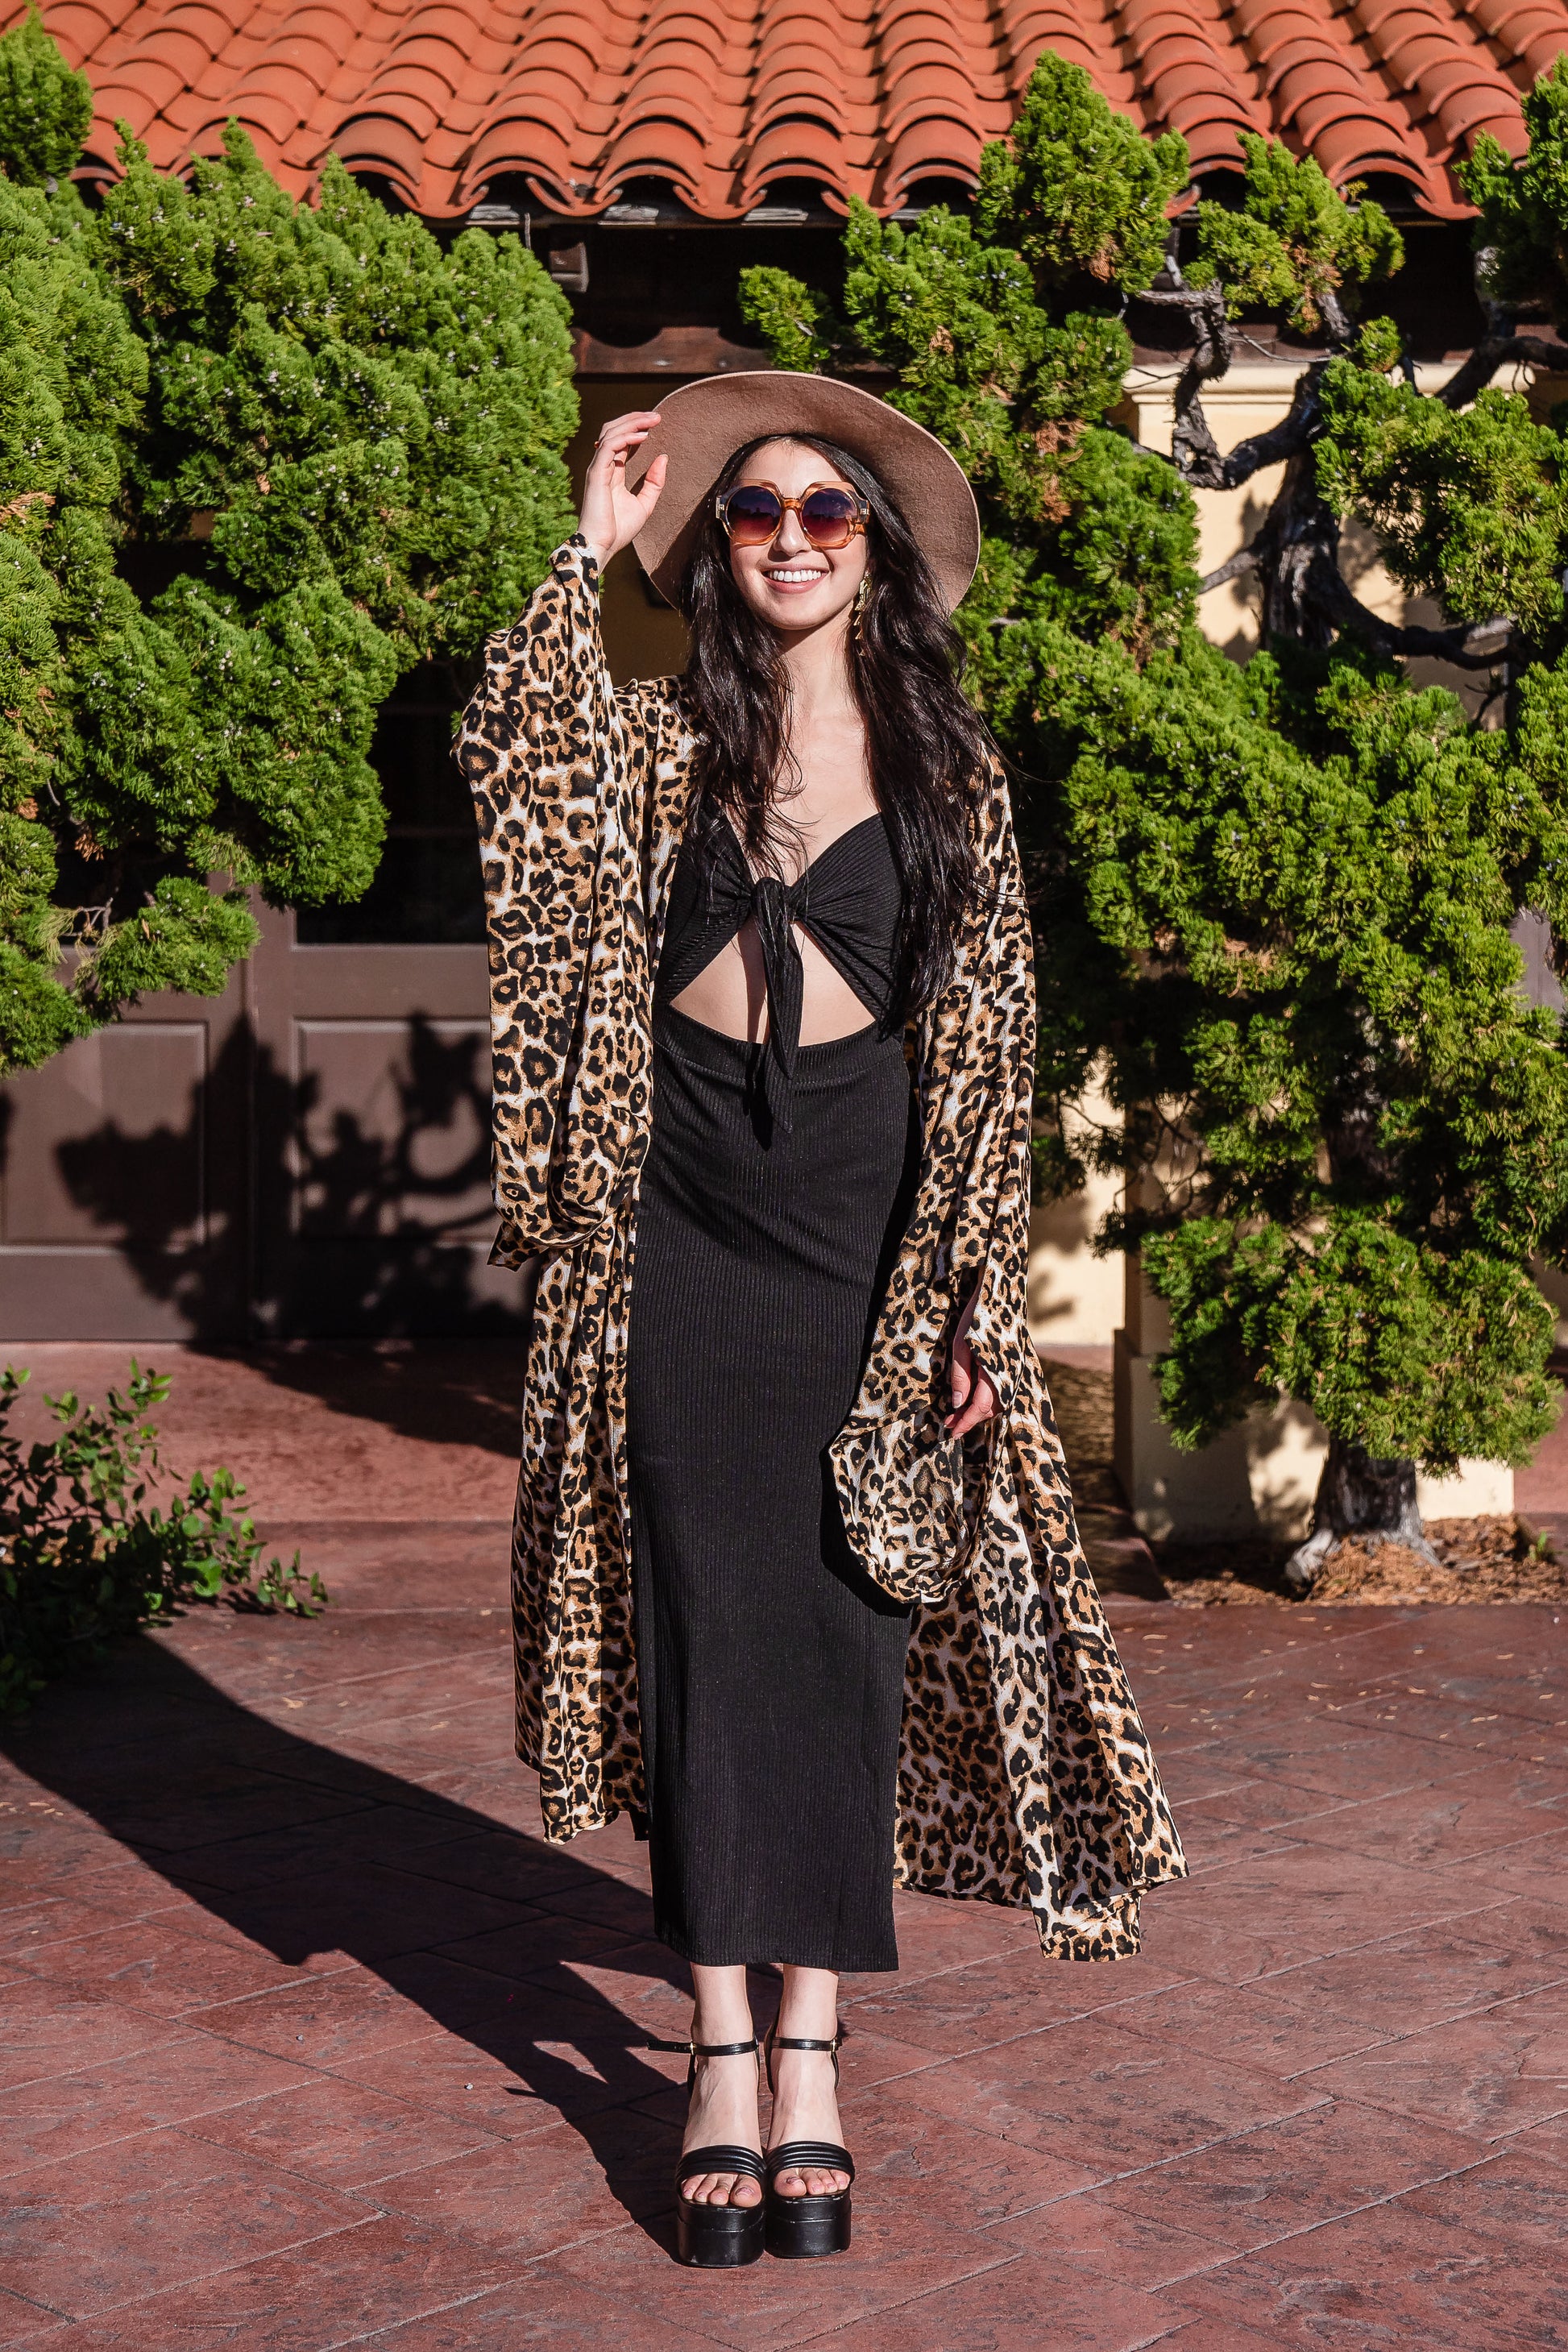 Leopard print fashion kimono robe featuring shades of brown, white, and black. It has a wrap tie waist for a cinched look, v-neck, square sleeves, and an ankle length hem. Classic, bohemian retro aesthetic.